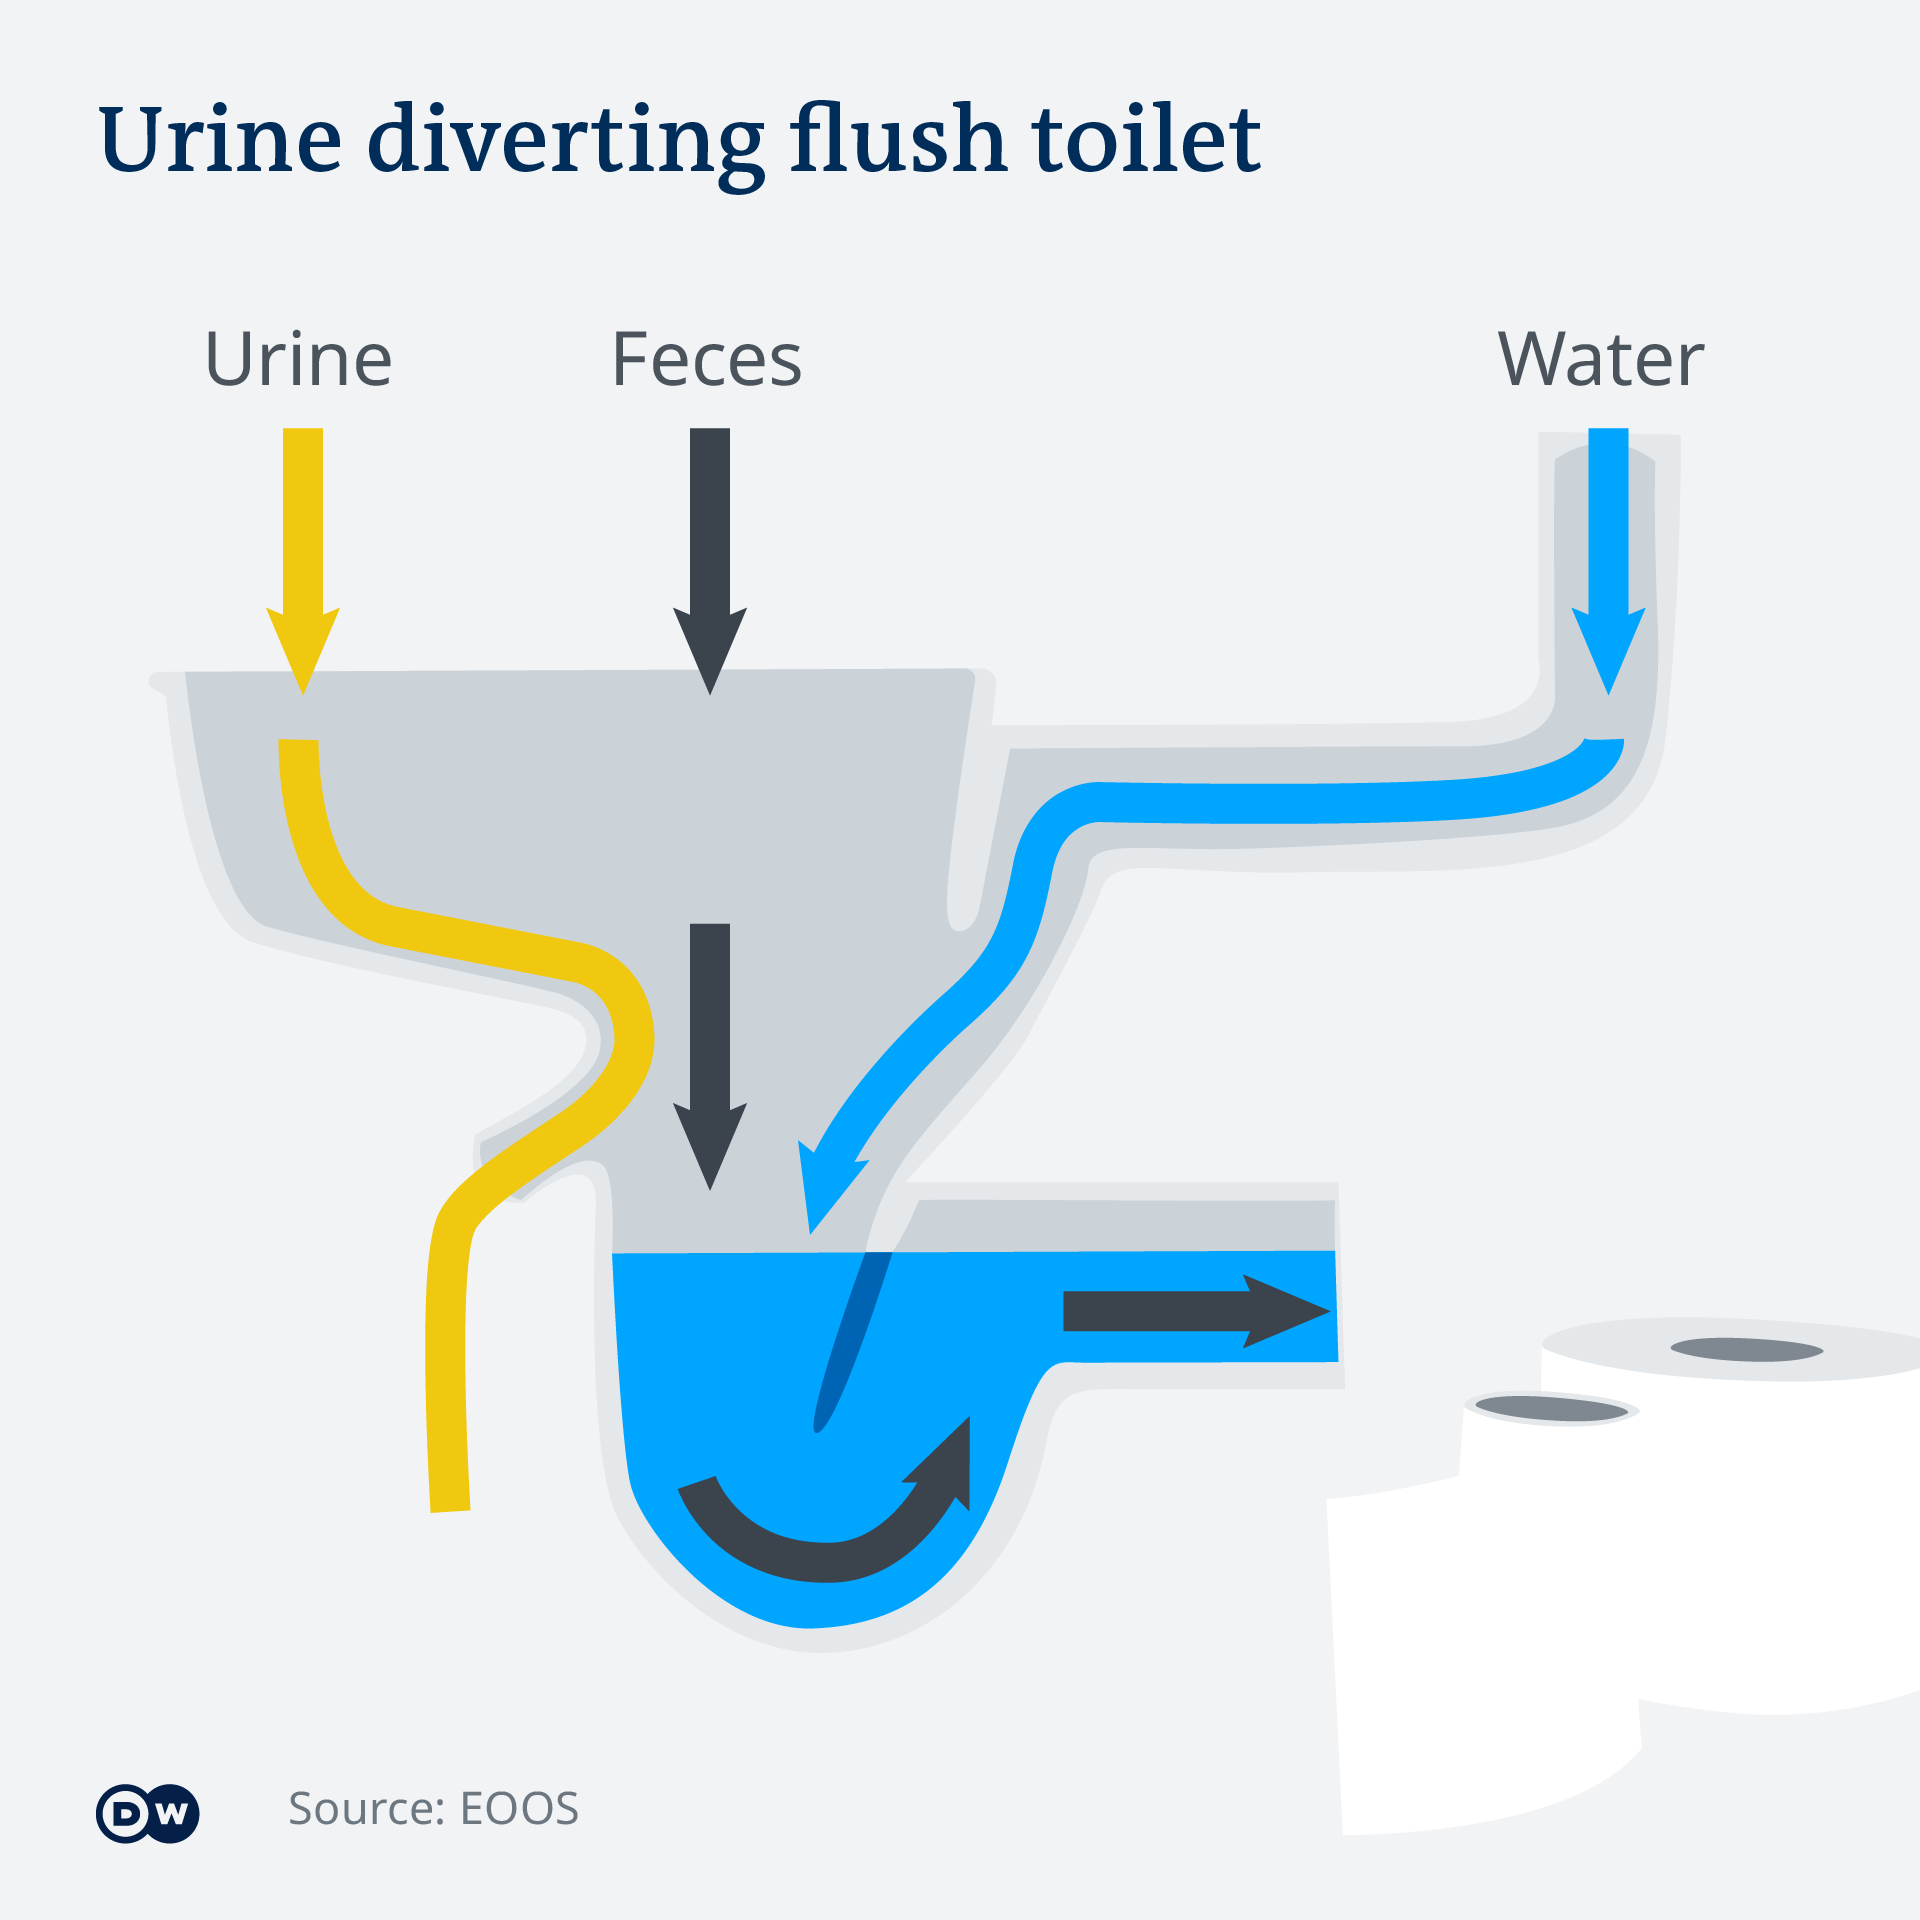 A graphic showing how urine diverting flush toilets work